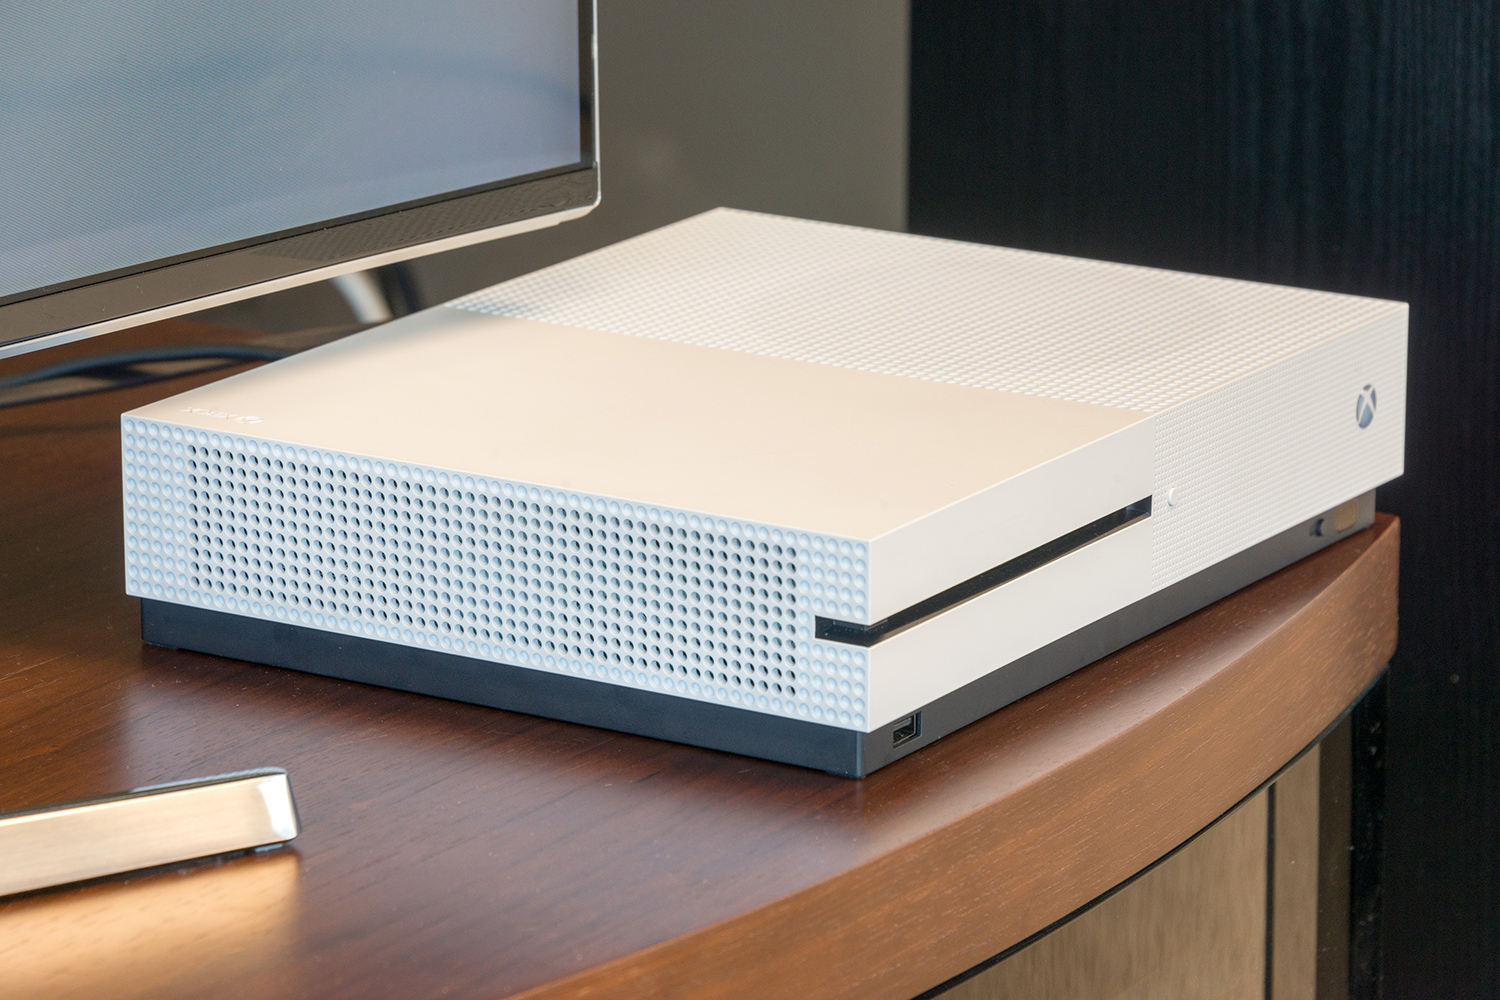 Xbox One S Review 2020: Affordable 4K Entertainment